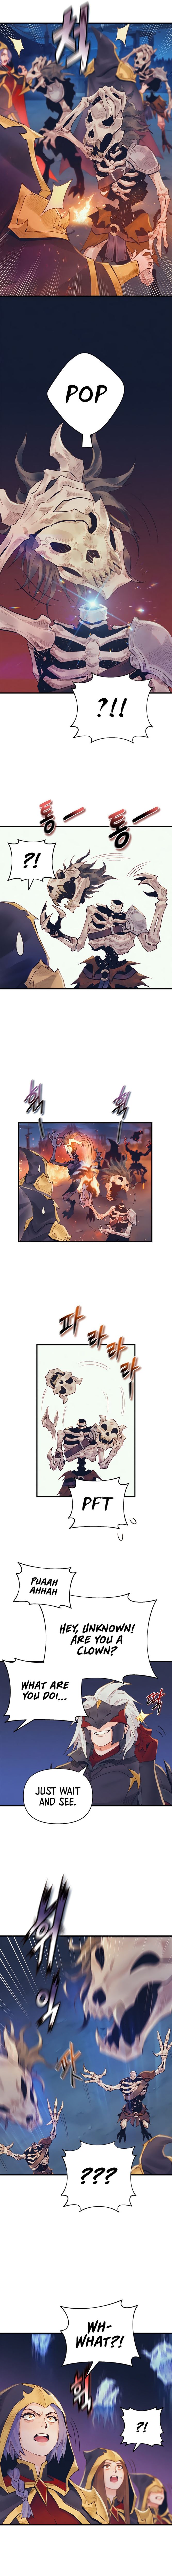 The Healing Priest of the Sun - Chapter 35 Page 3